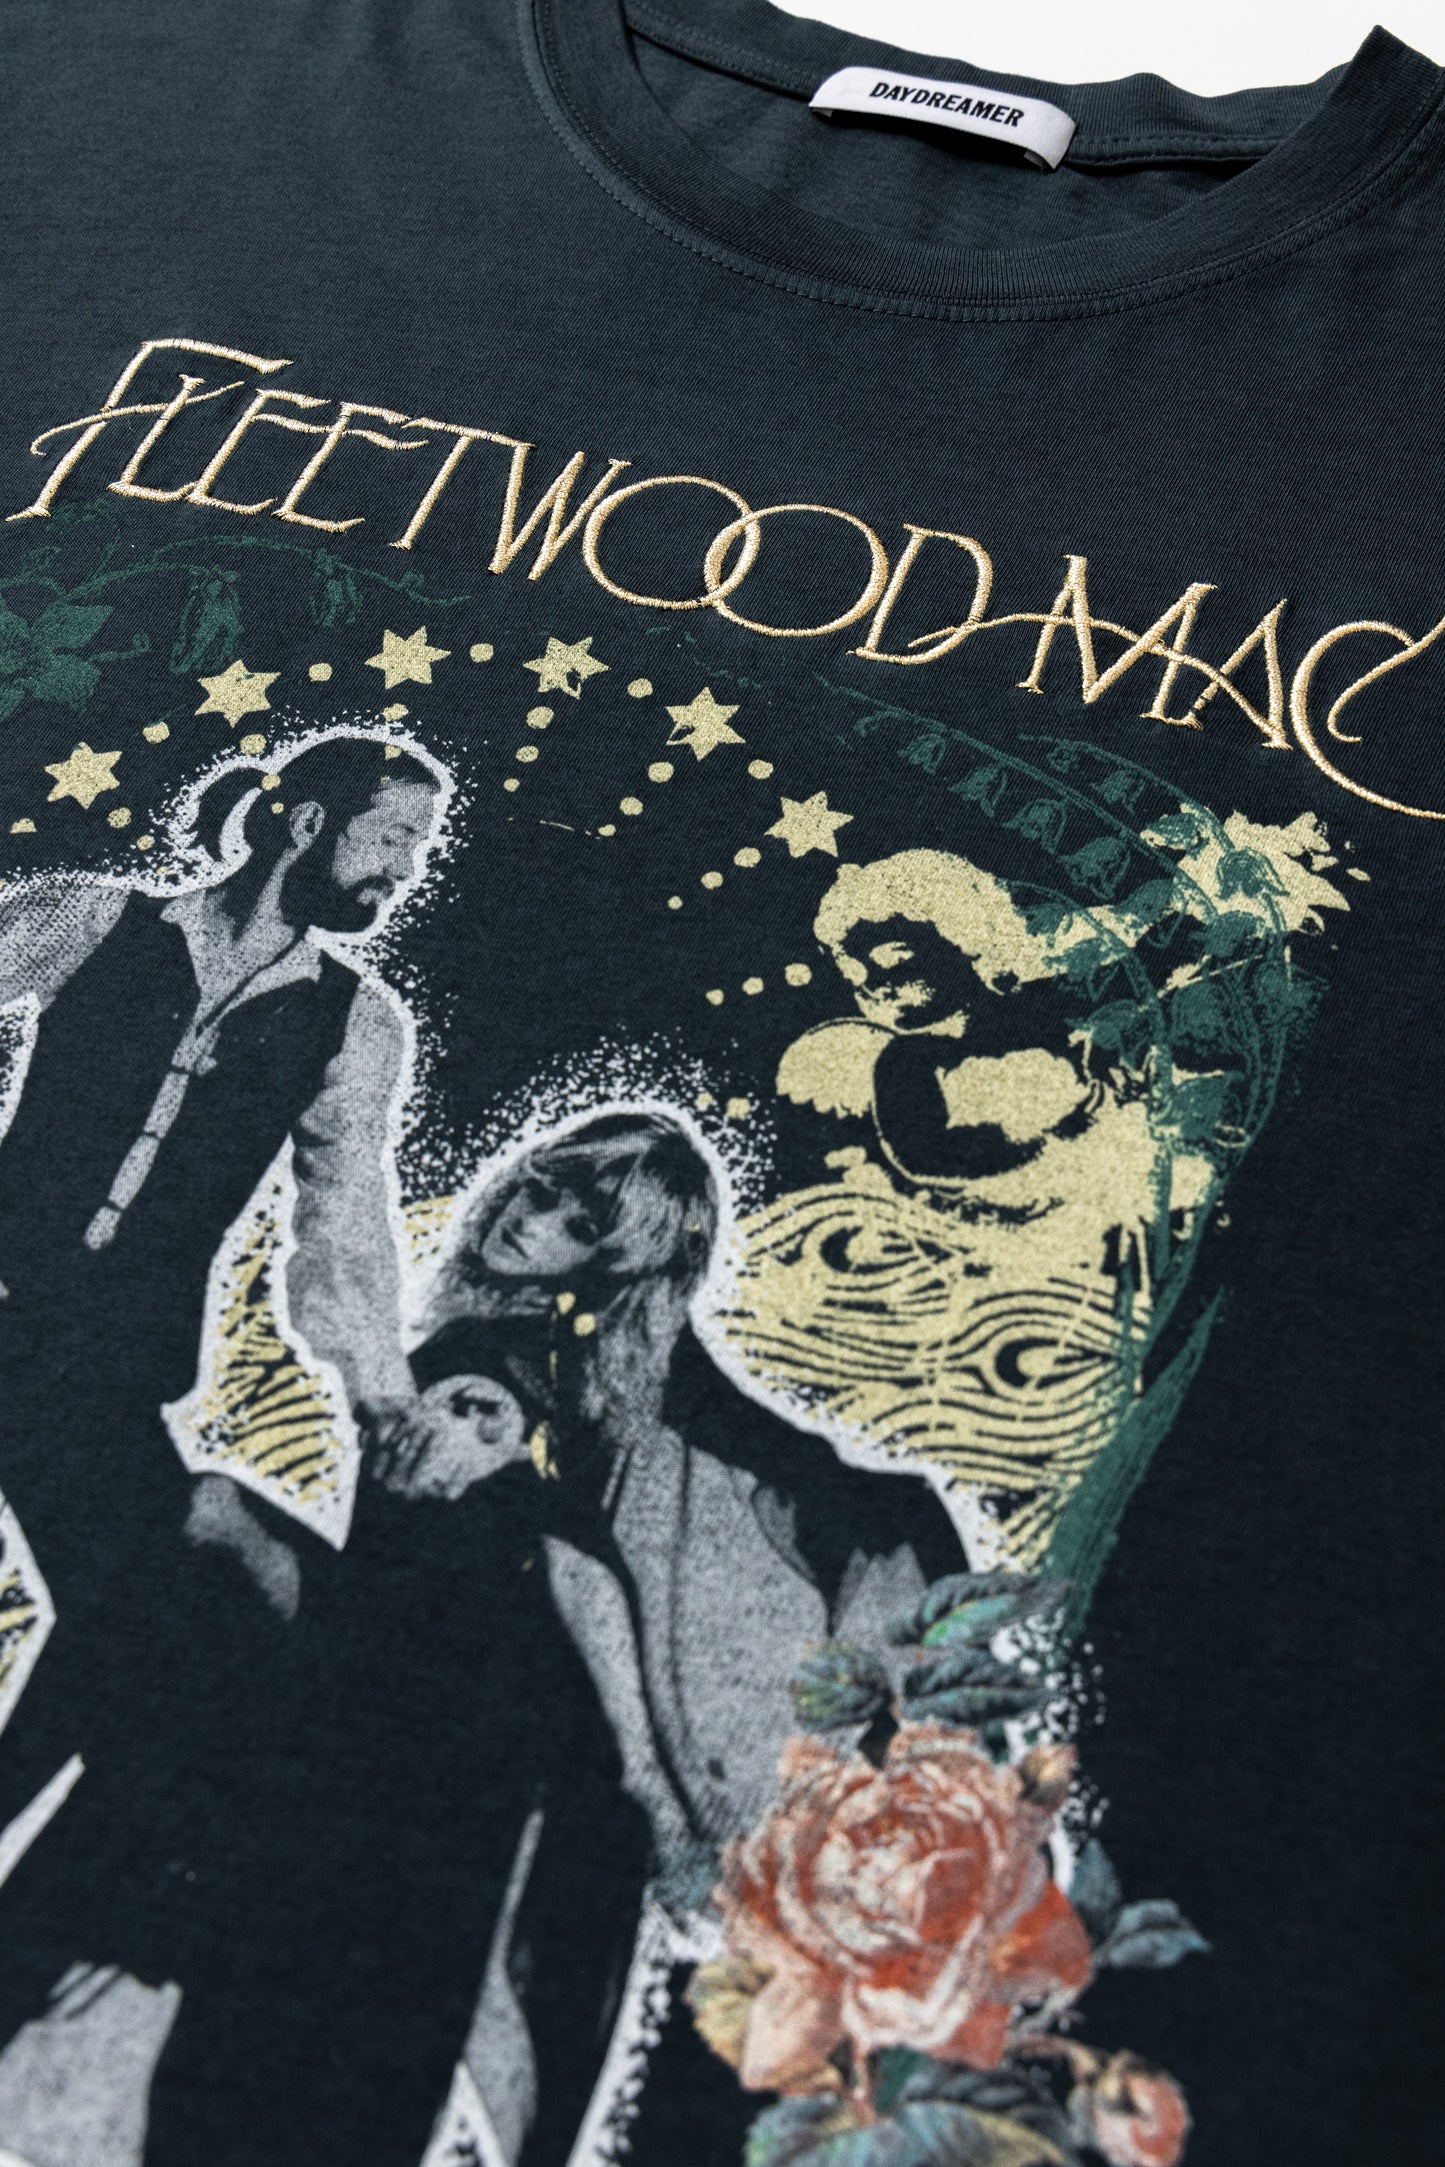 Fleetwood Mac Rumours Embroidered OS Tee